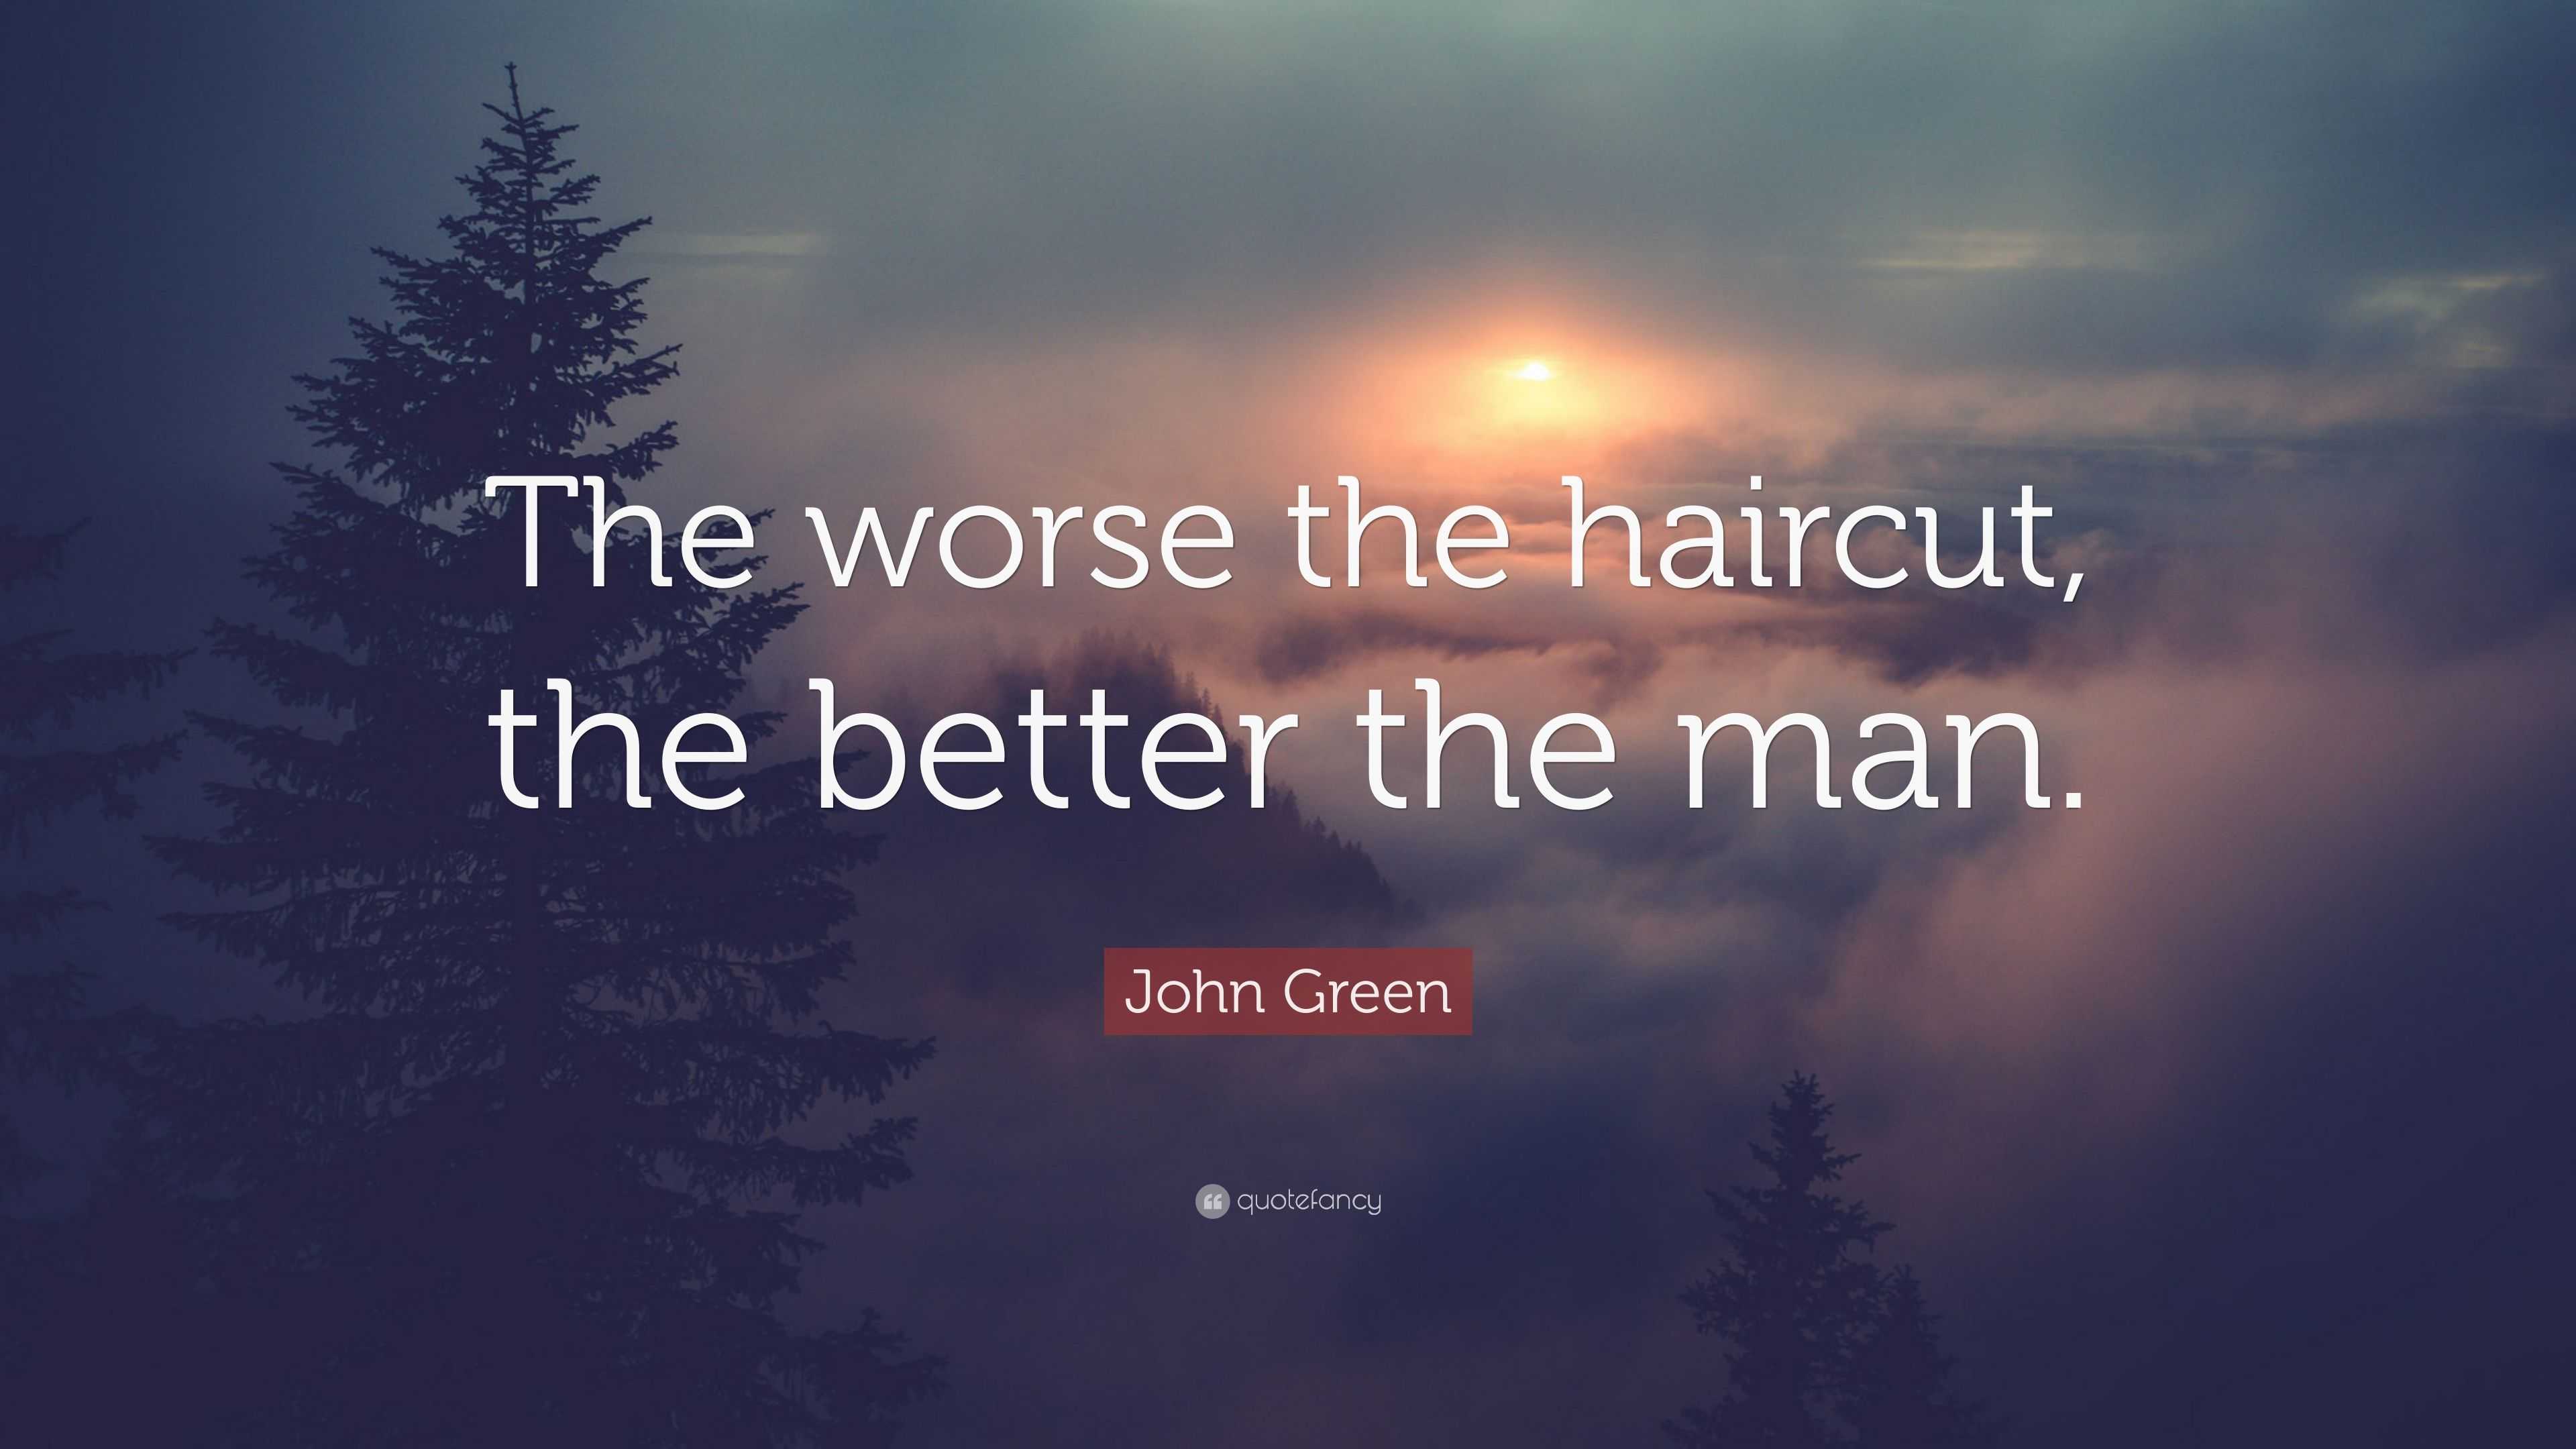 John Green Quote: “The worse the haircut, the better the man.”